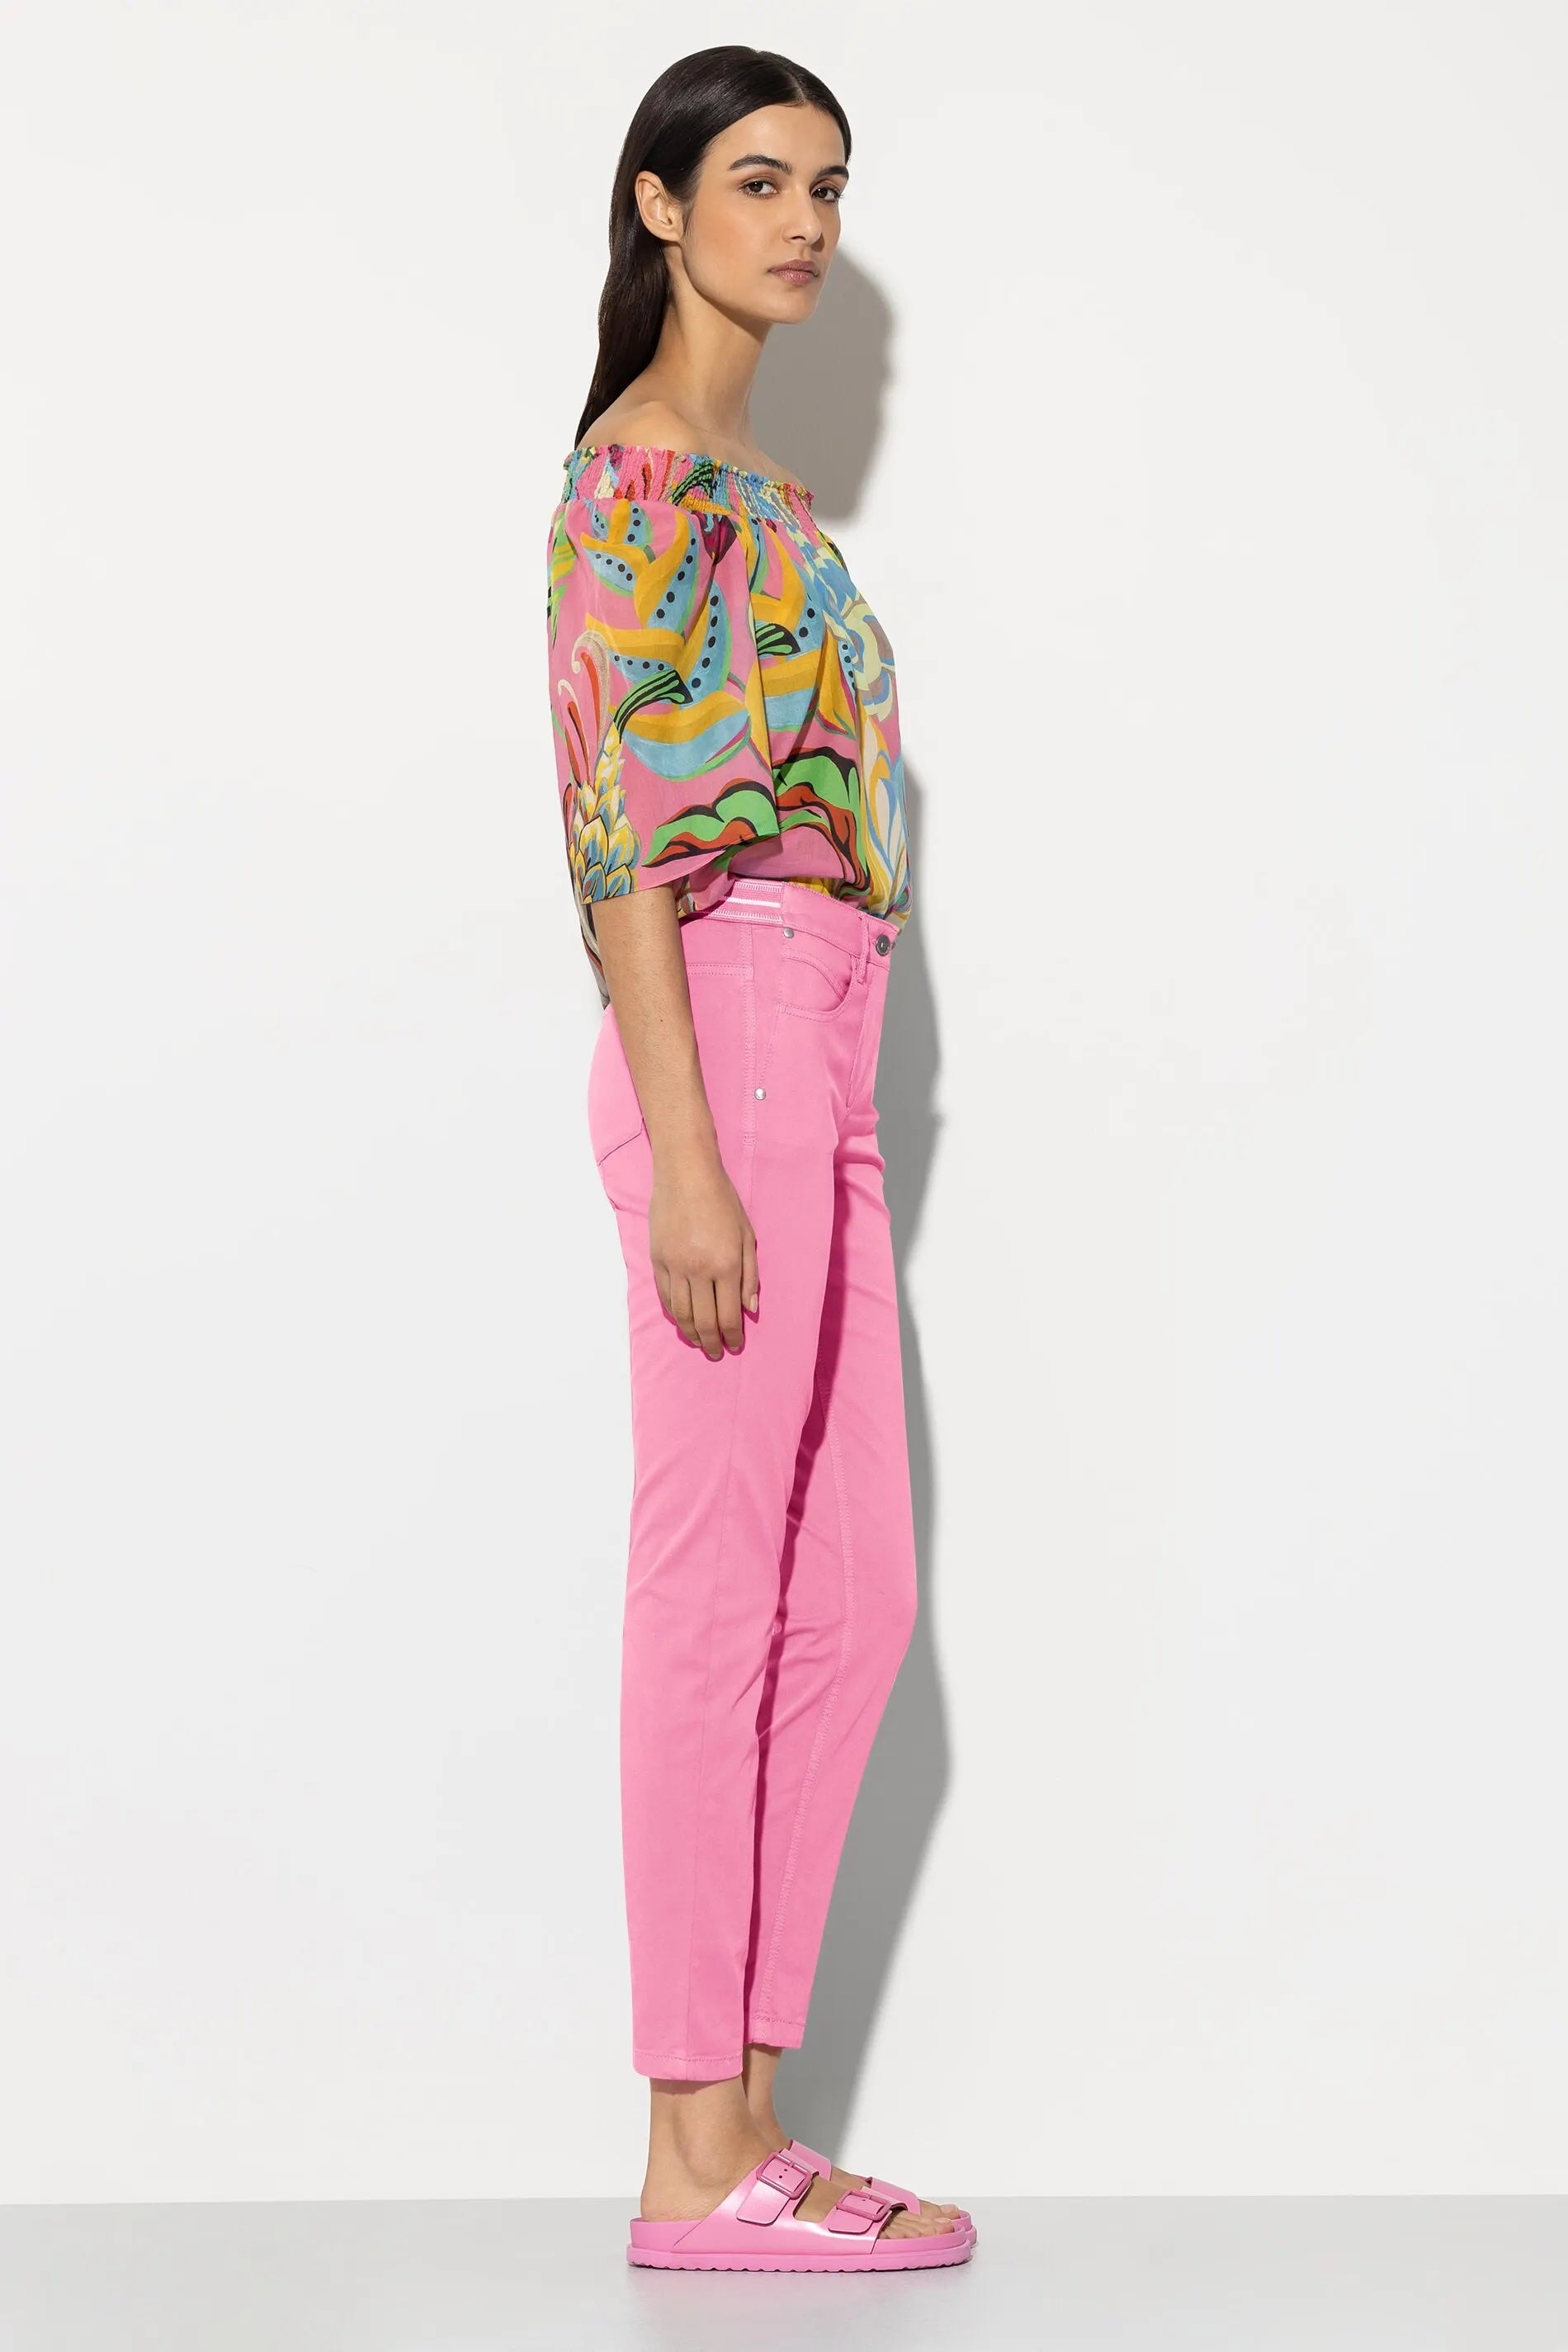 Candy Pink Elasticated Back Cotton Jeans